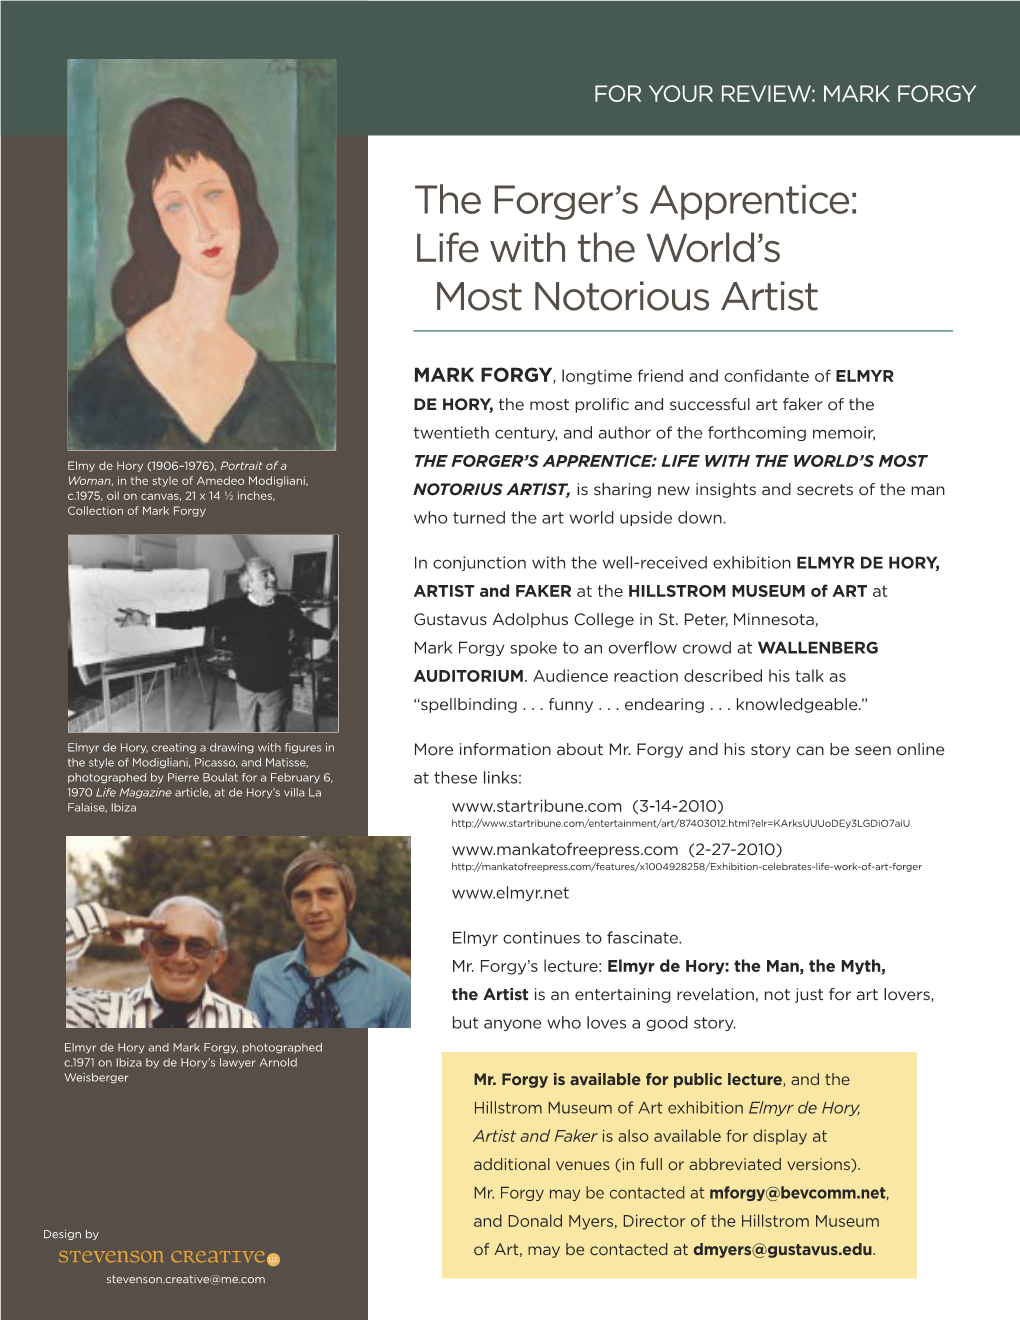 The Forger's Apprentice: Life with the World's Most